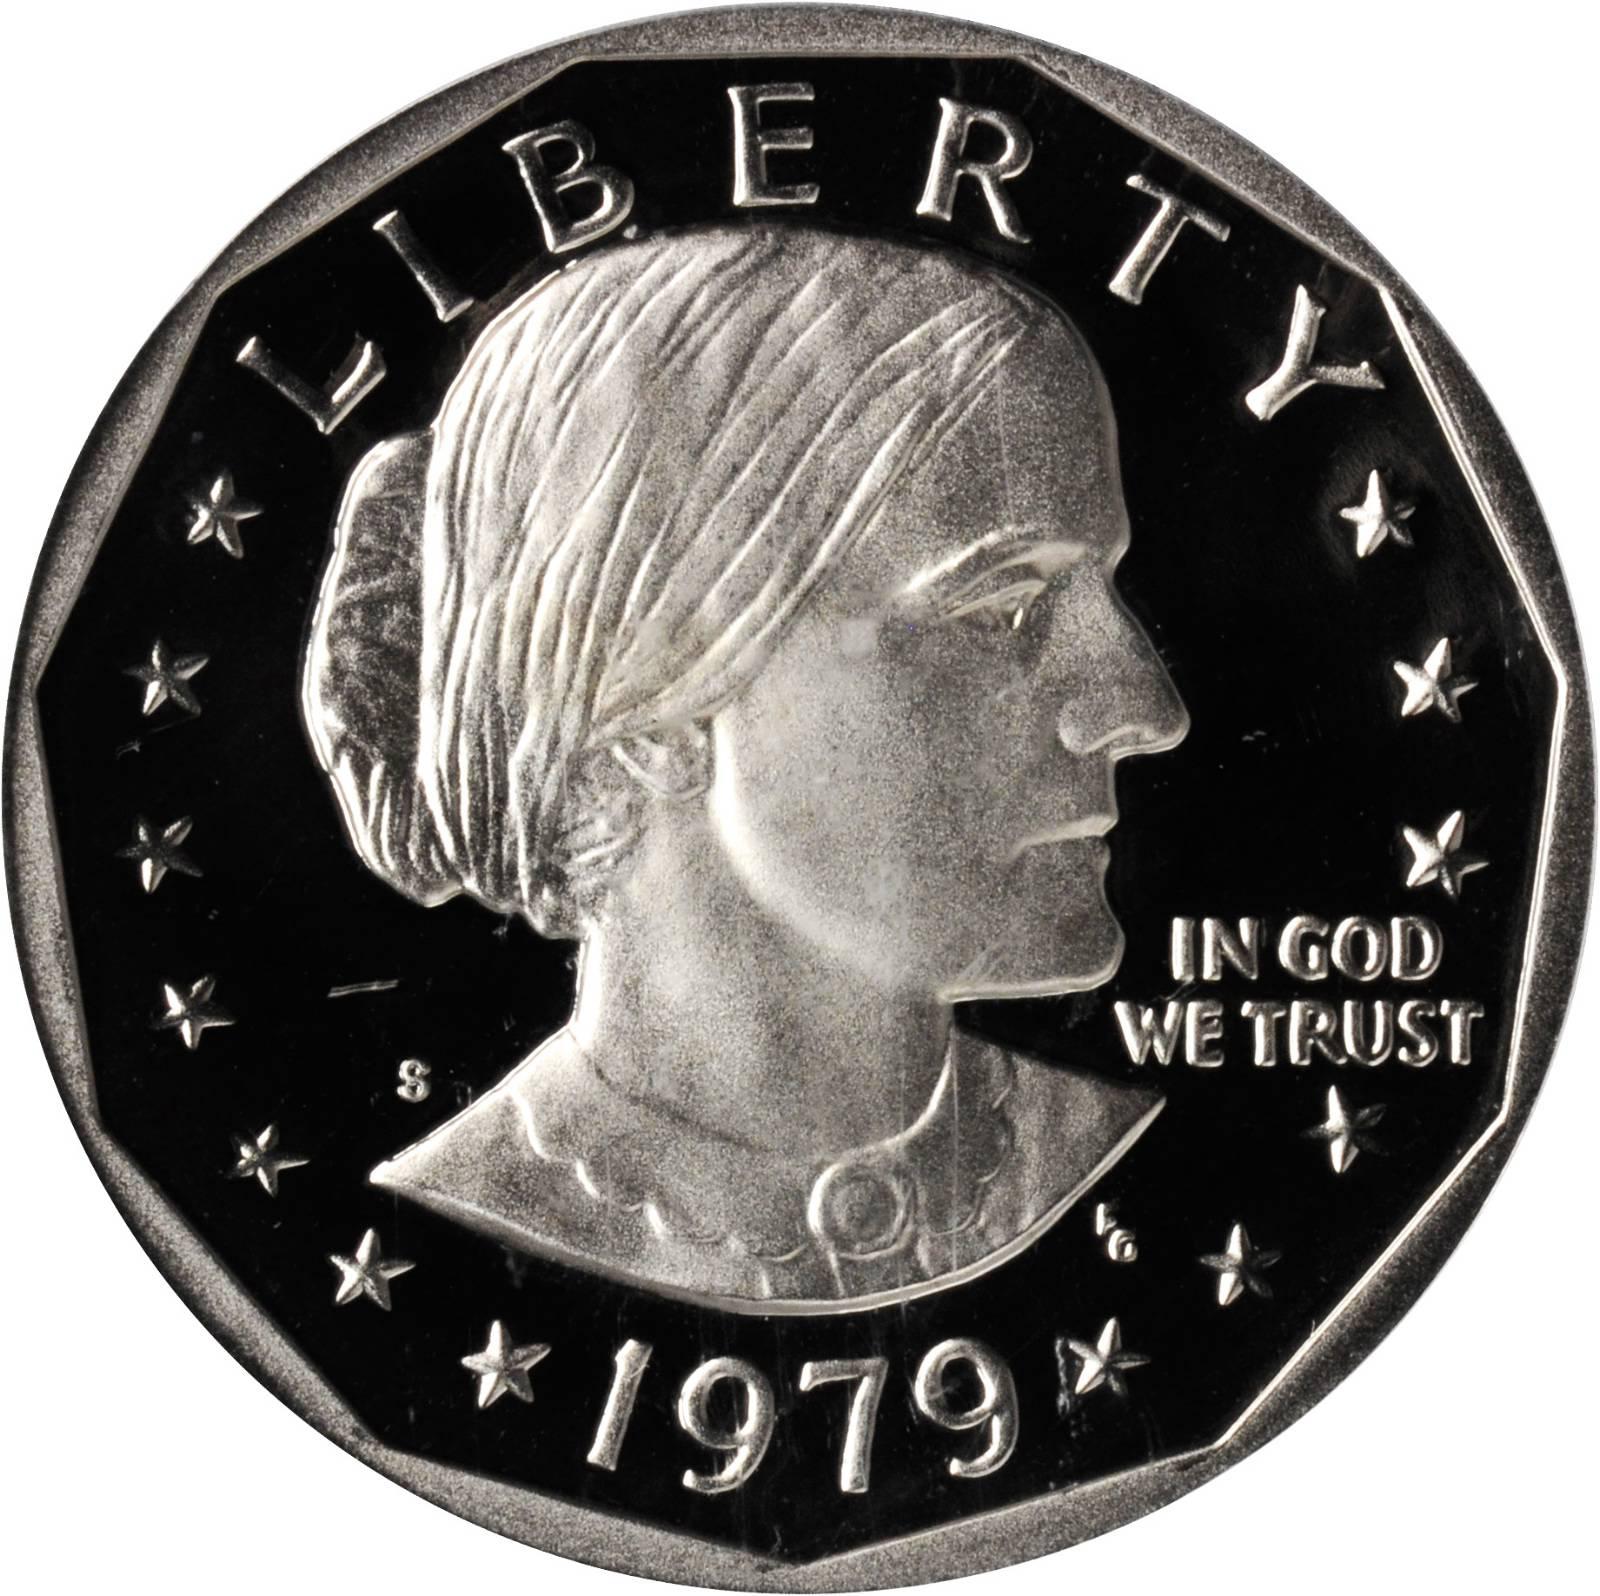 susan b anthony coin 1879 value